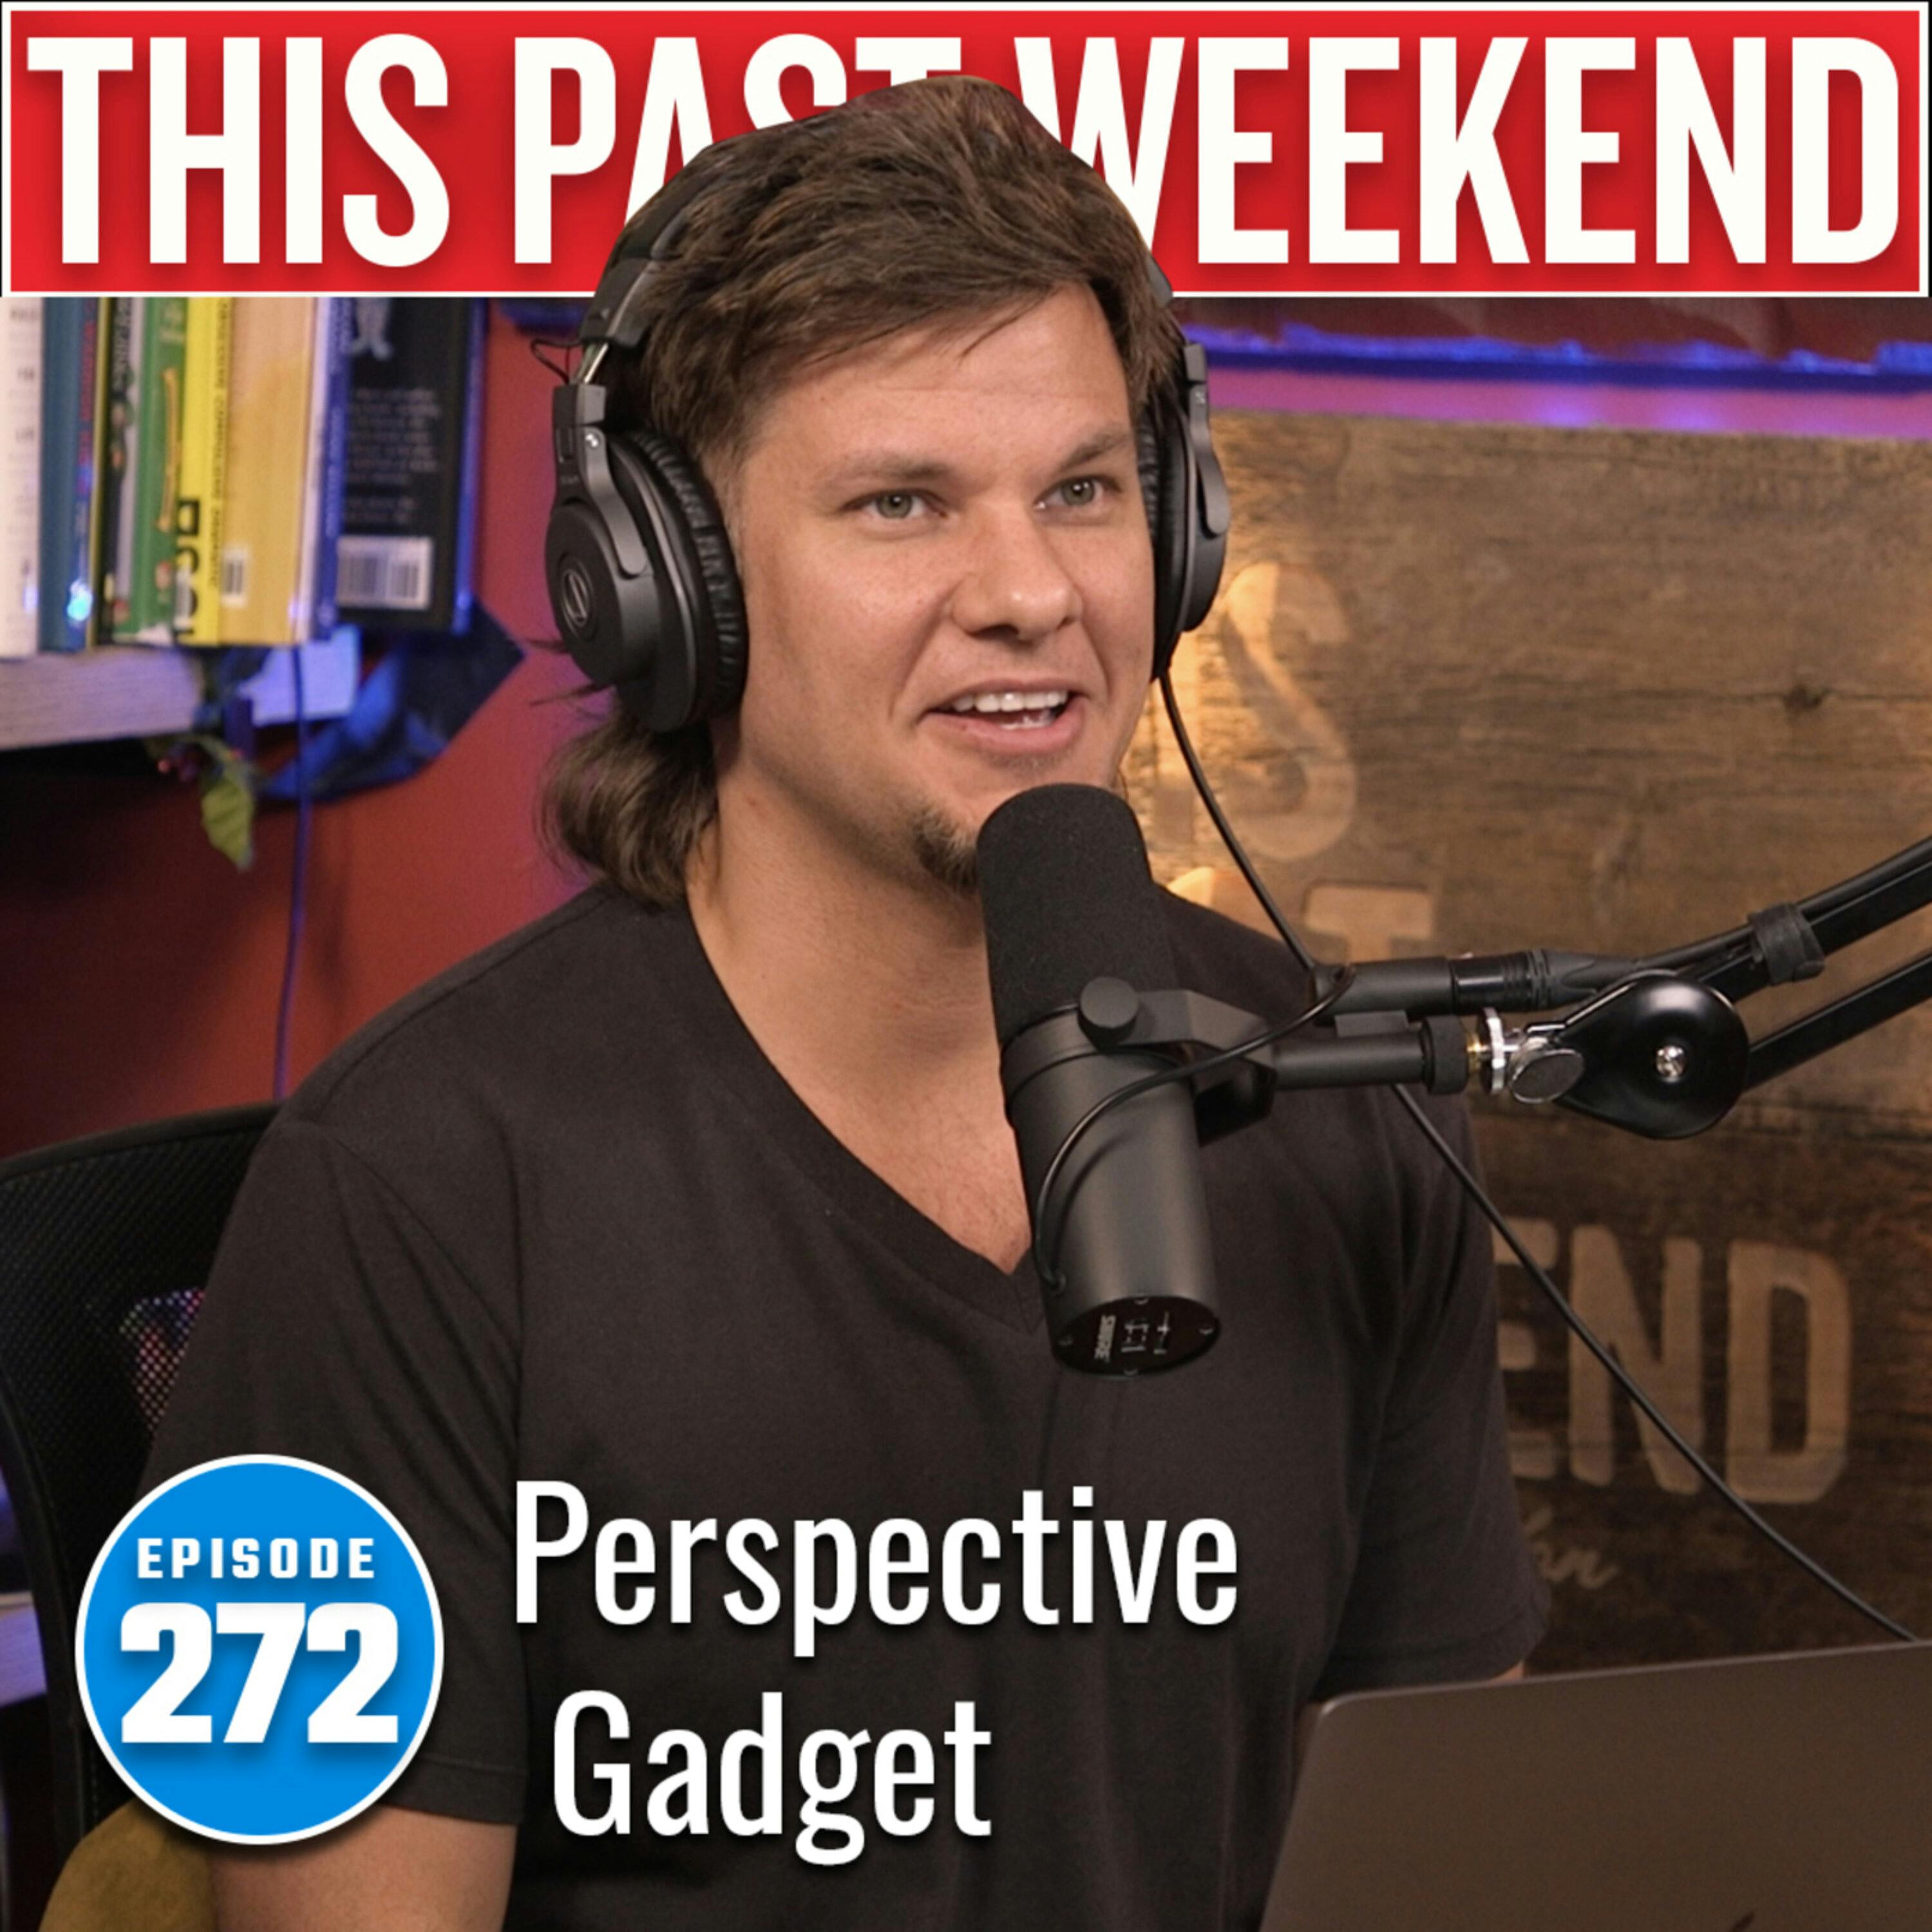 Perspective Gadget | This Past Weekend #272 by Theo Von